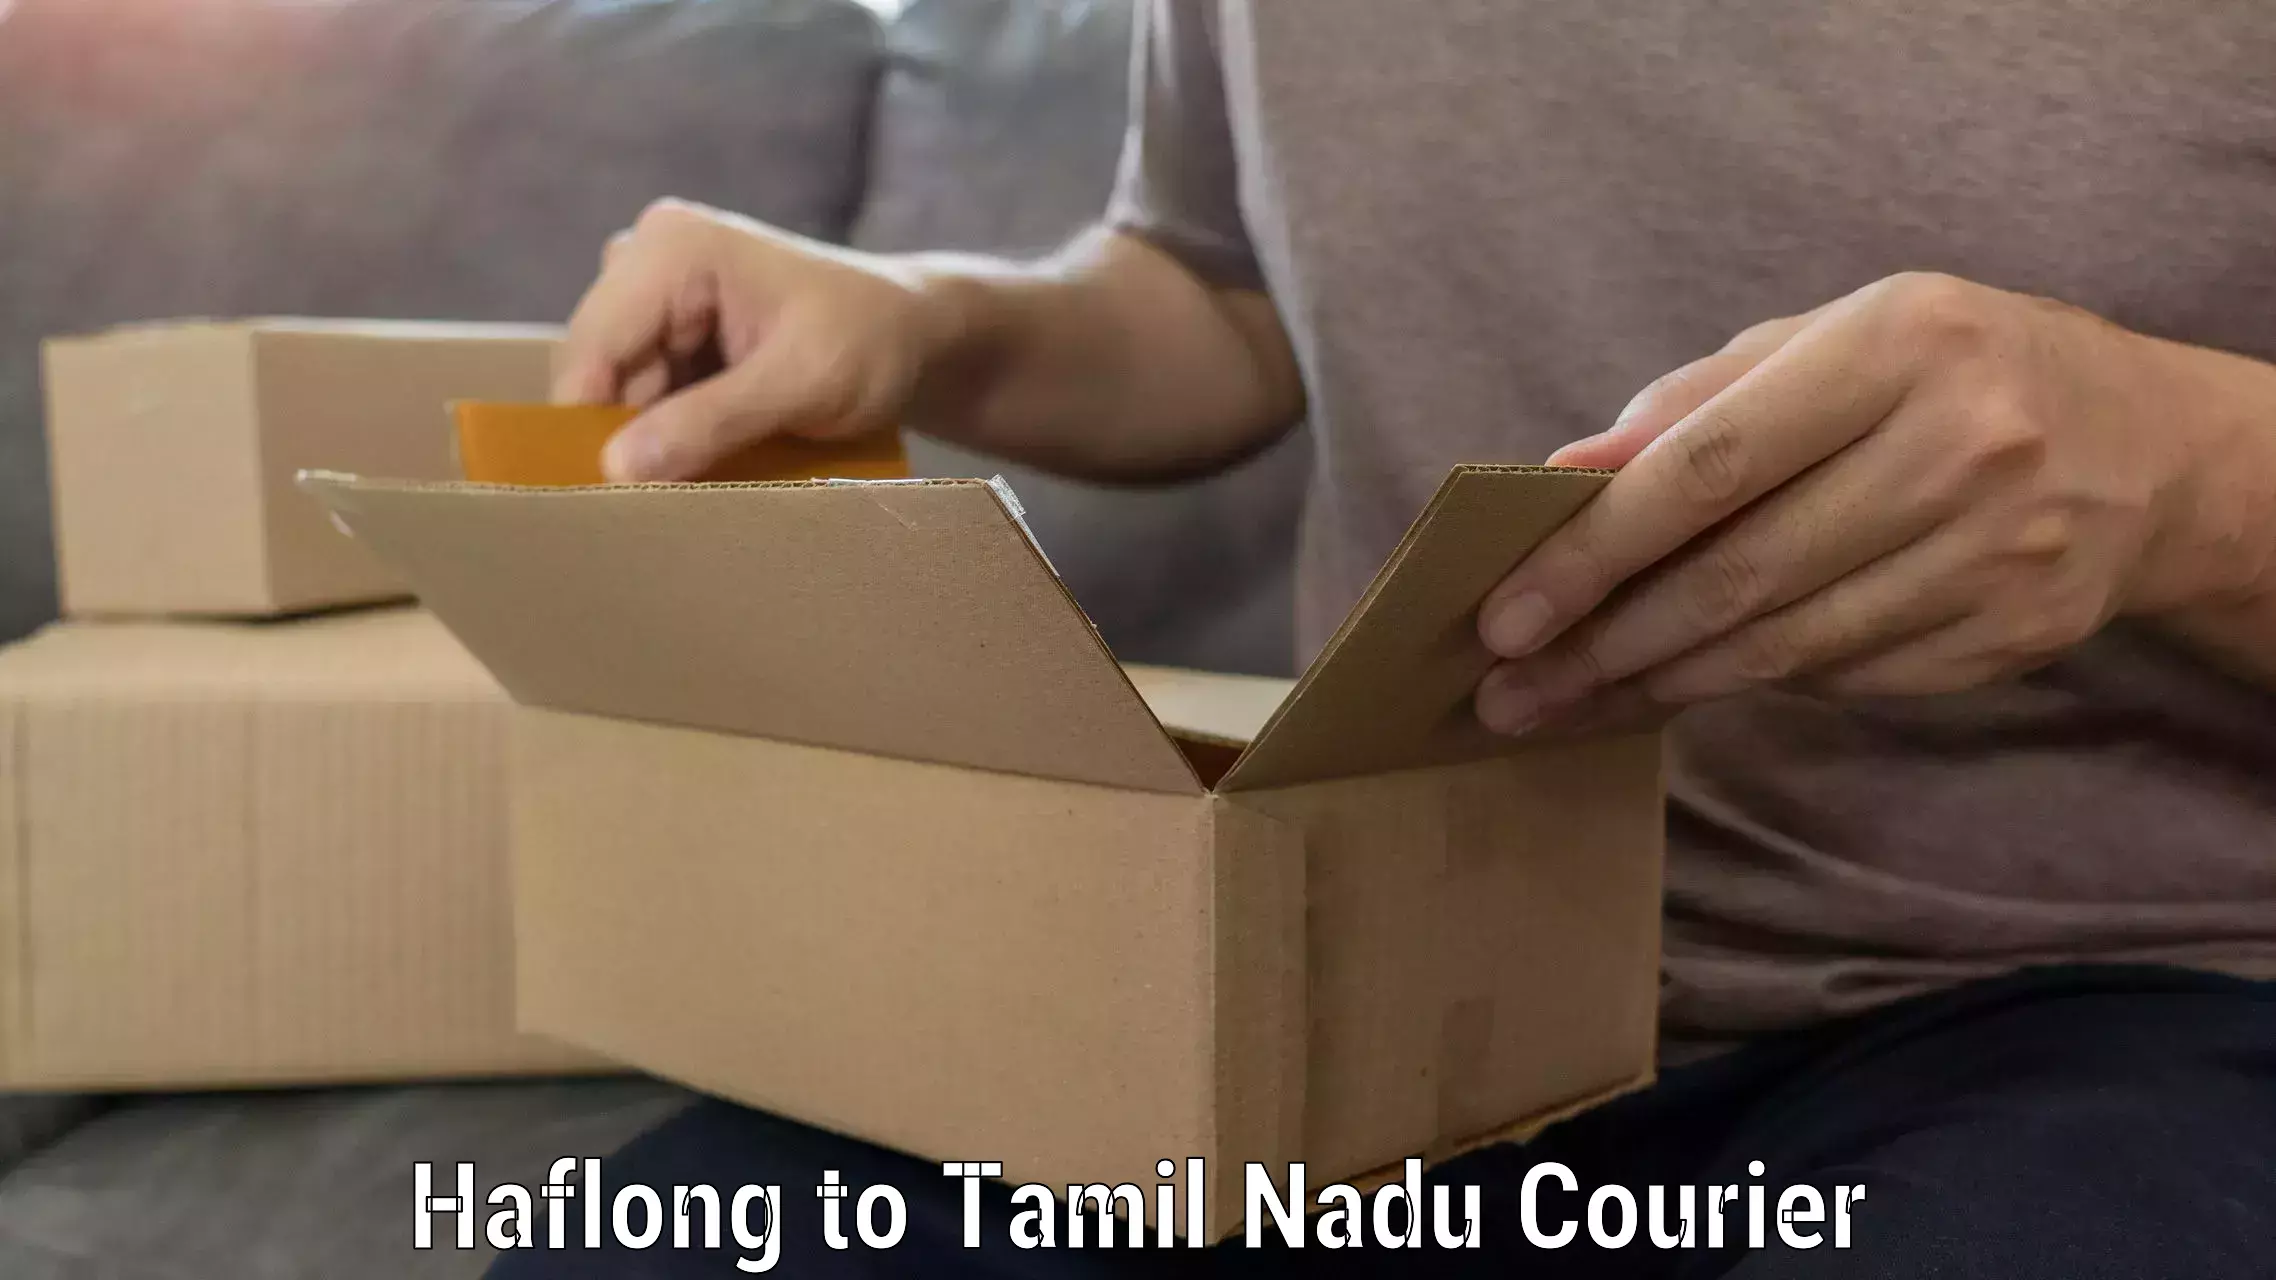 Home relocation experts Haflong to Mettur